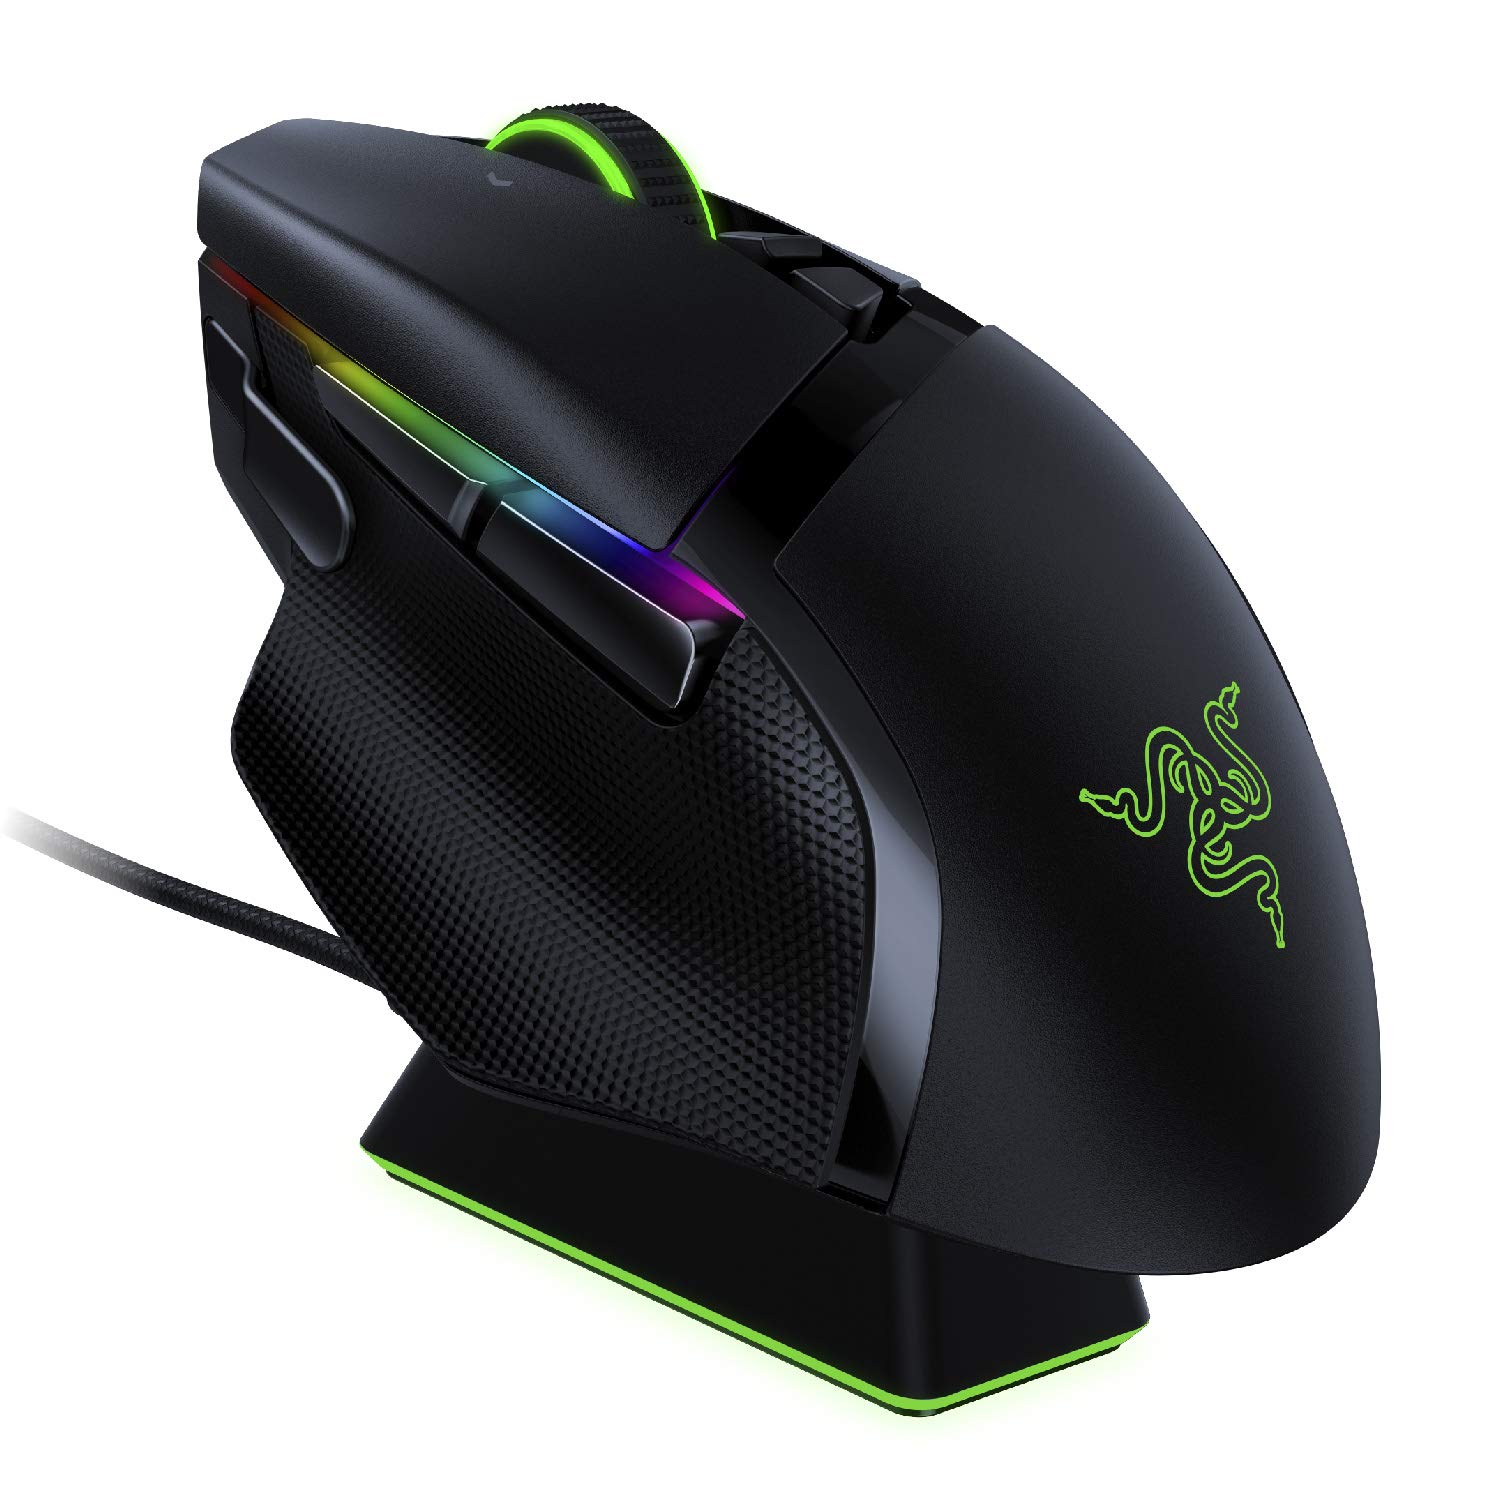 Razer Basilisk Ultimate HyperSpeed Wireless Gaming Mouse w/ Charging Dock: Fastest Gaming Mouse Switch - 20K DPI Optical Sensor - Chroma RGB - 11 Programmable Buttons